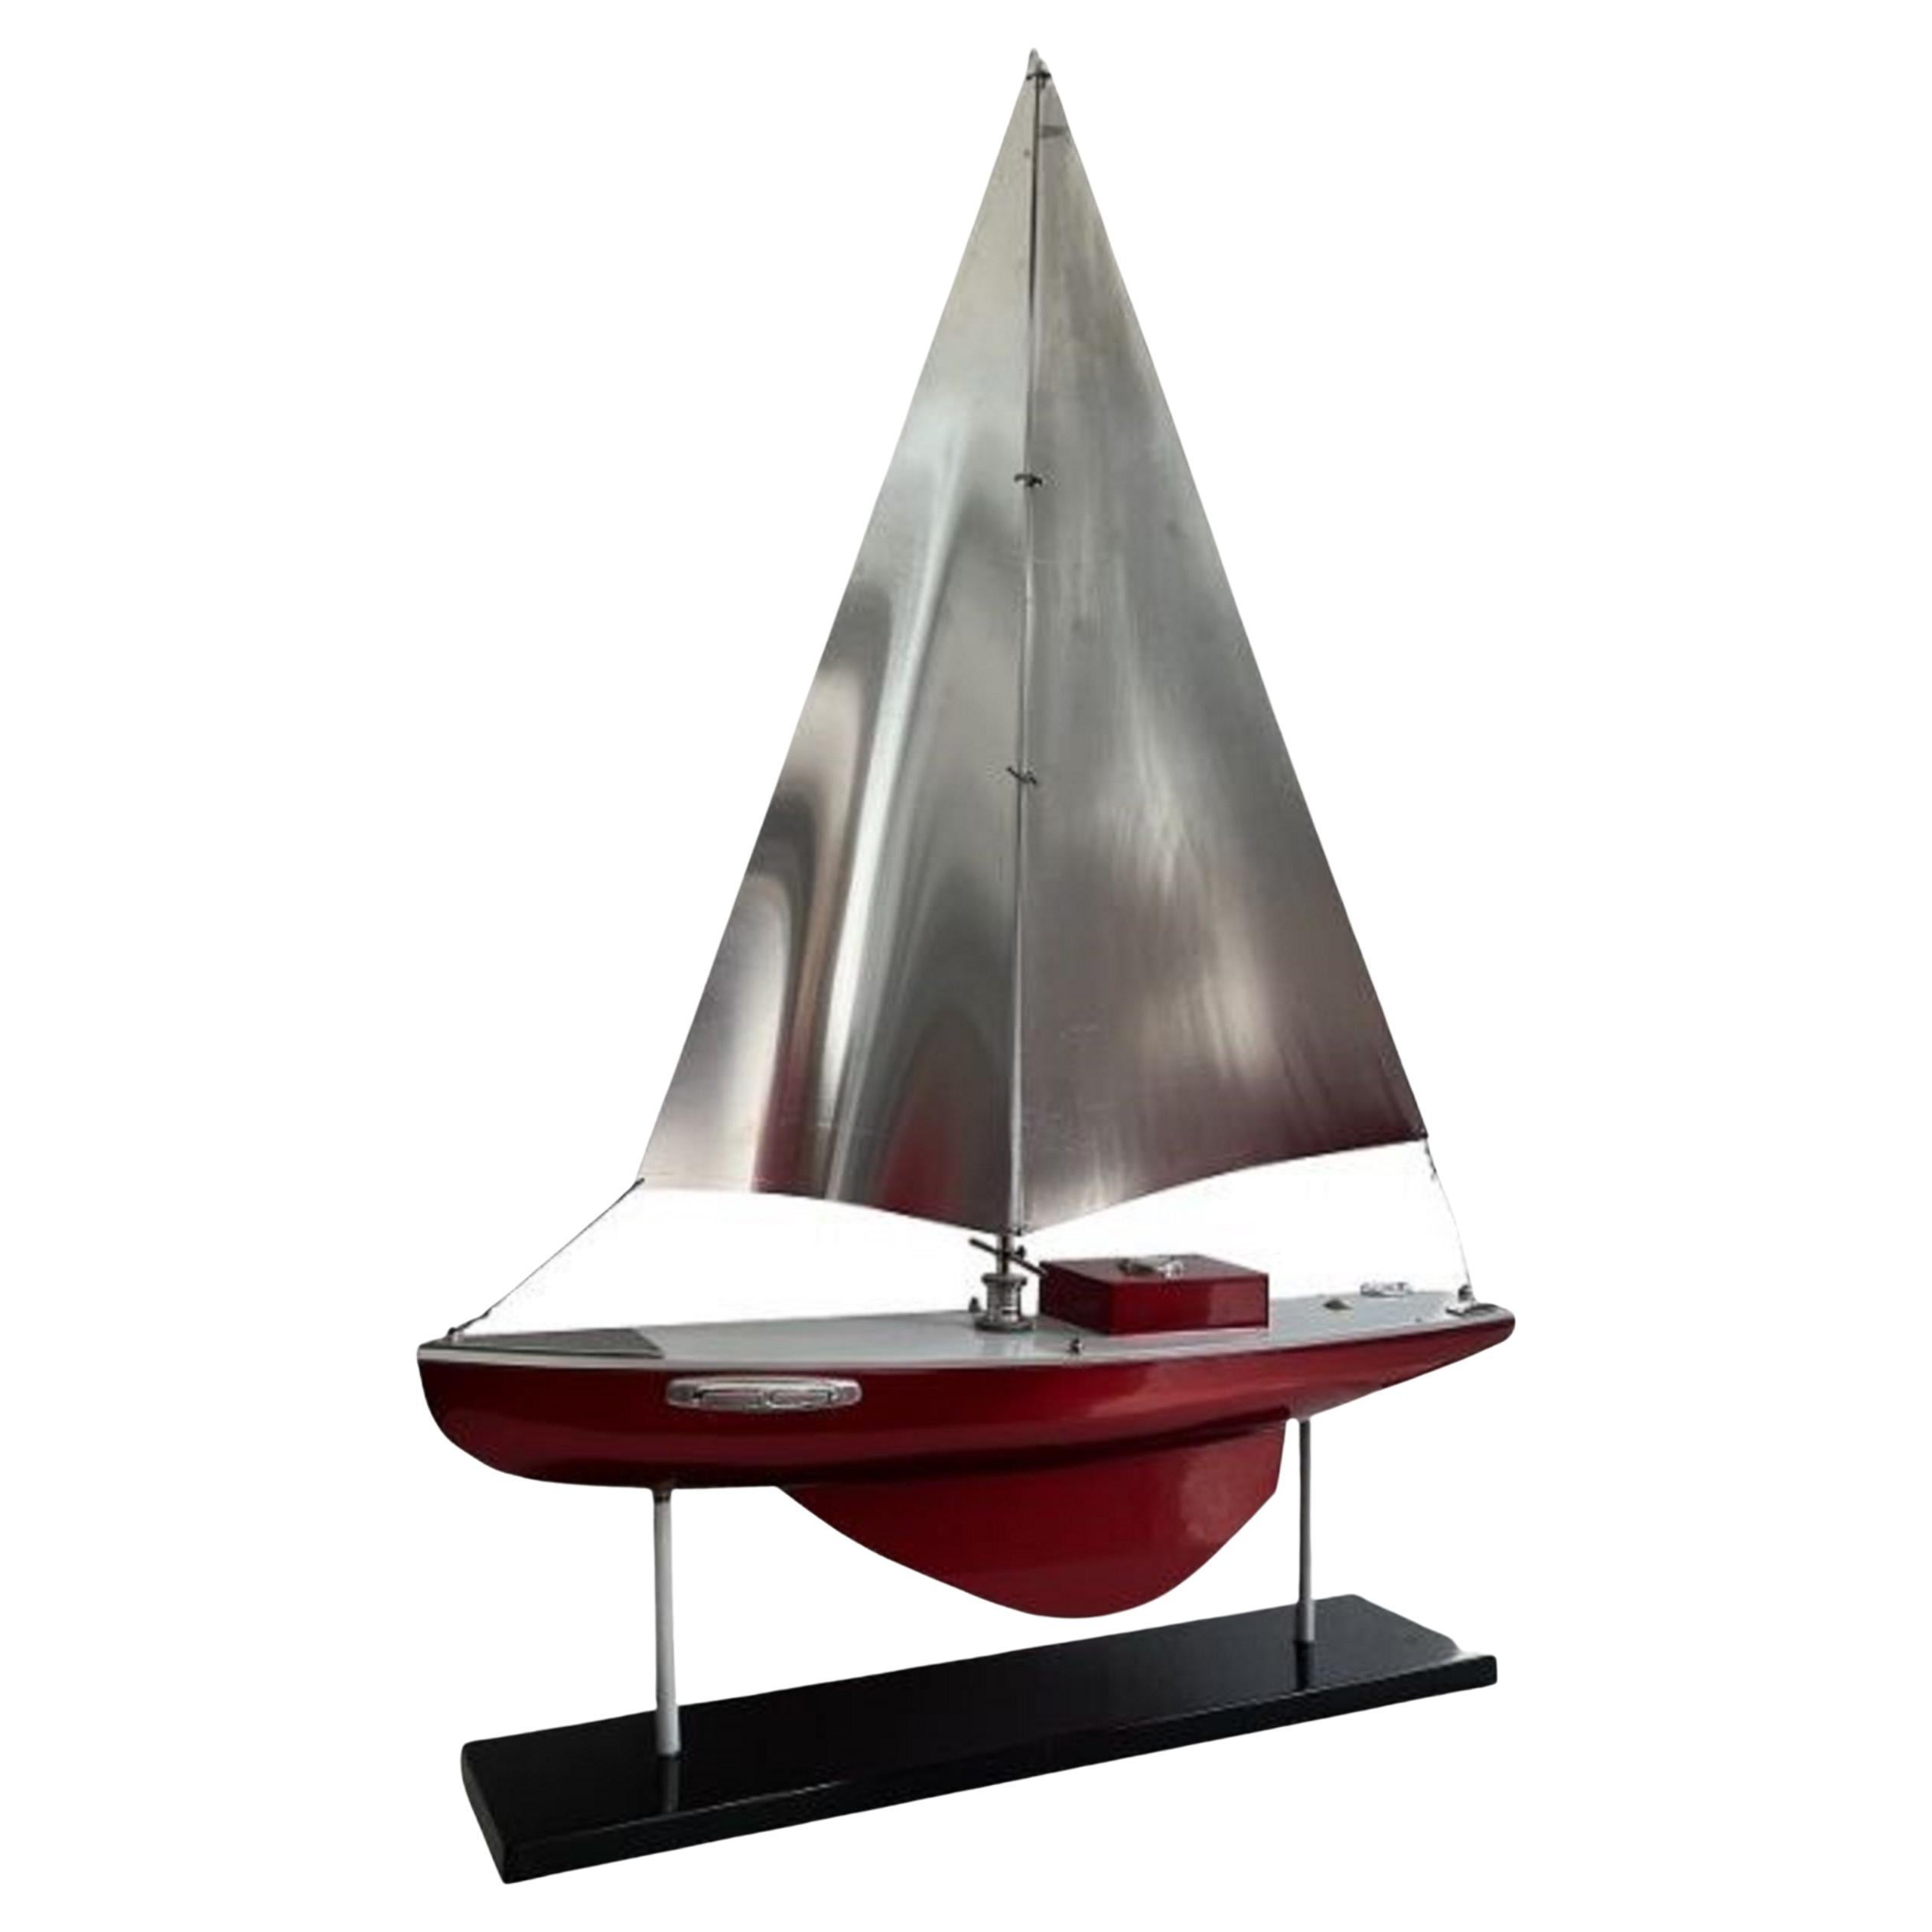 Art Deco Inspired Boat in Wood and steel  Designer: Marcelo Peña, 2014 For Sale